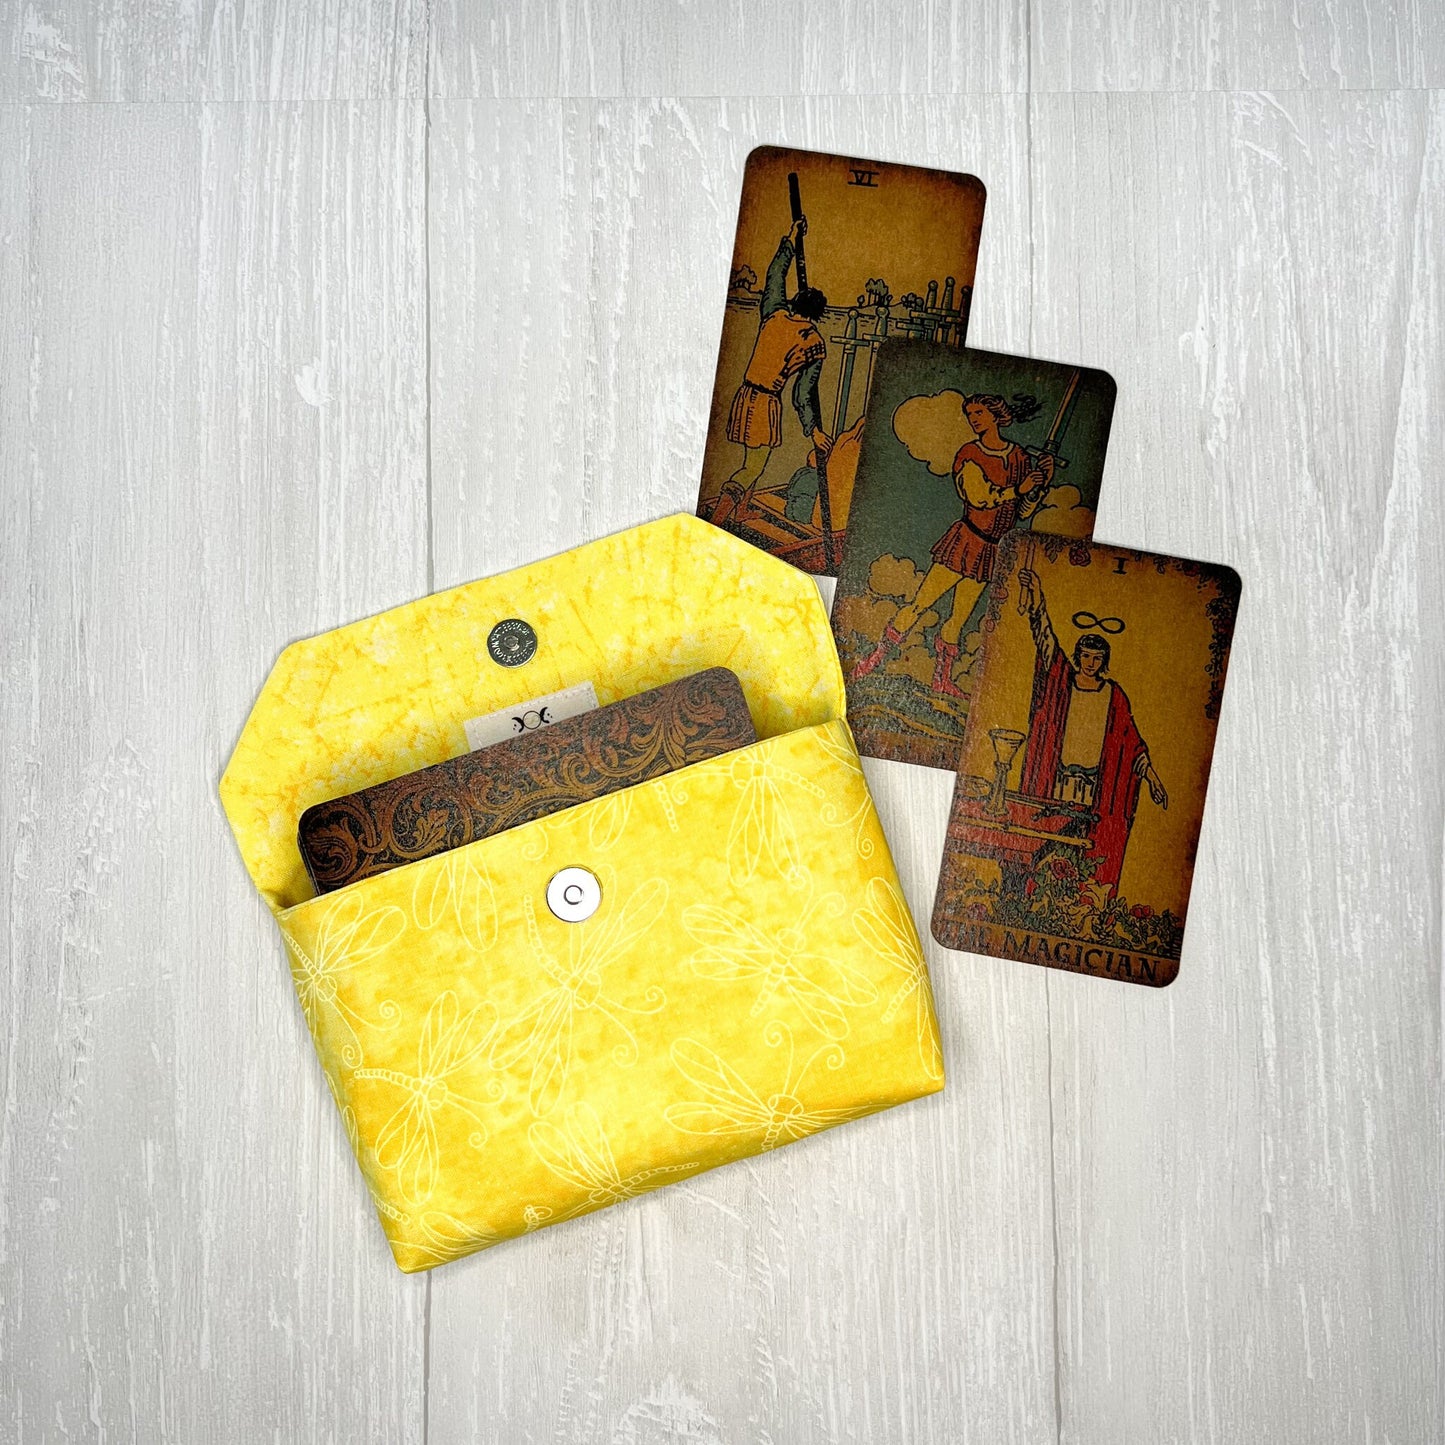 Yellow Dragonfly Tarot Pouch Clutch, Magnetic Clasp Pouch, Tarot Bag, Tarot Reading Supplies & Accessories, Tarot Card Storage Holder